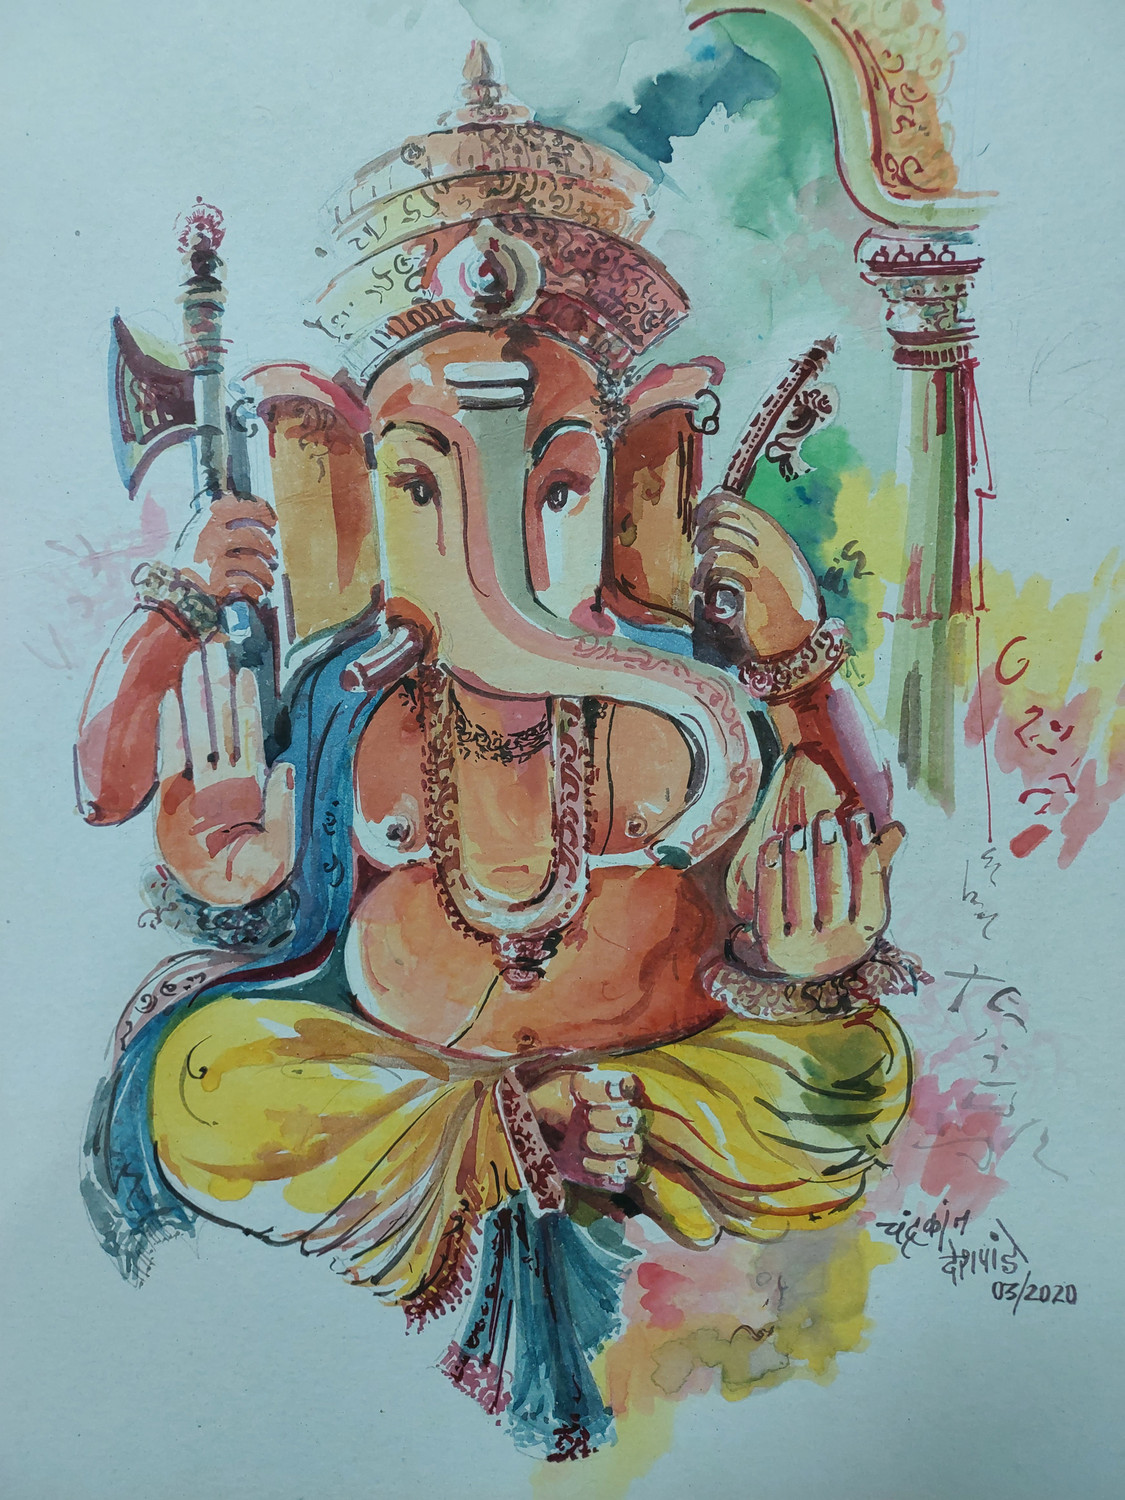 Ganesh Painting A4 Size Paper Made With Pencil | gintaa.com